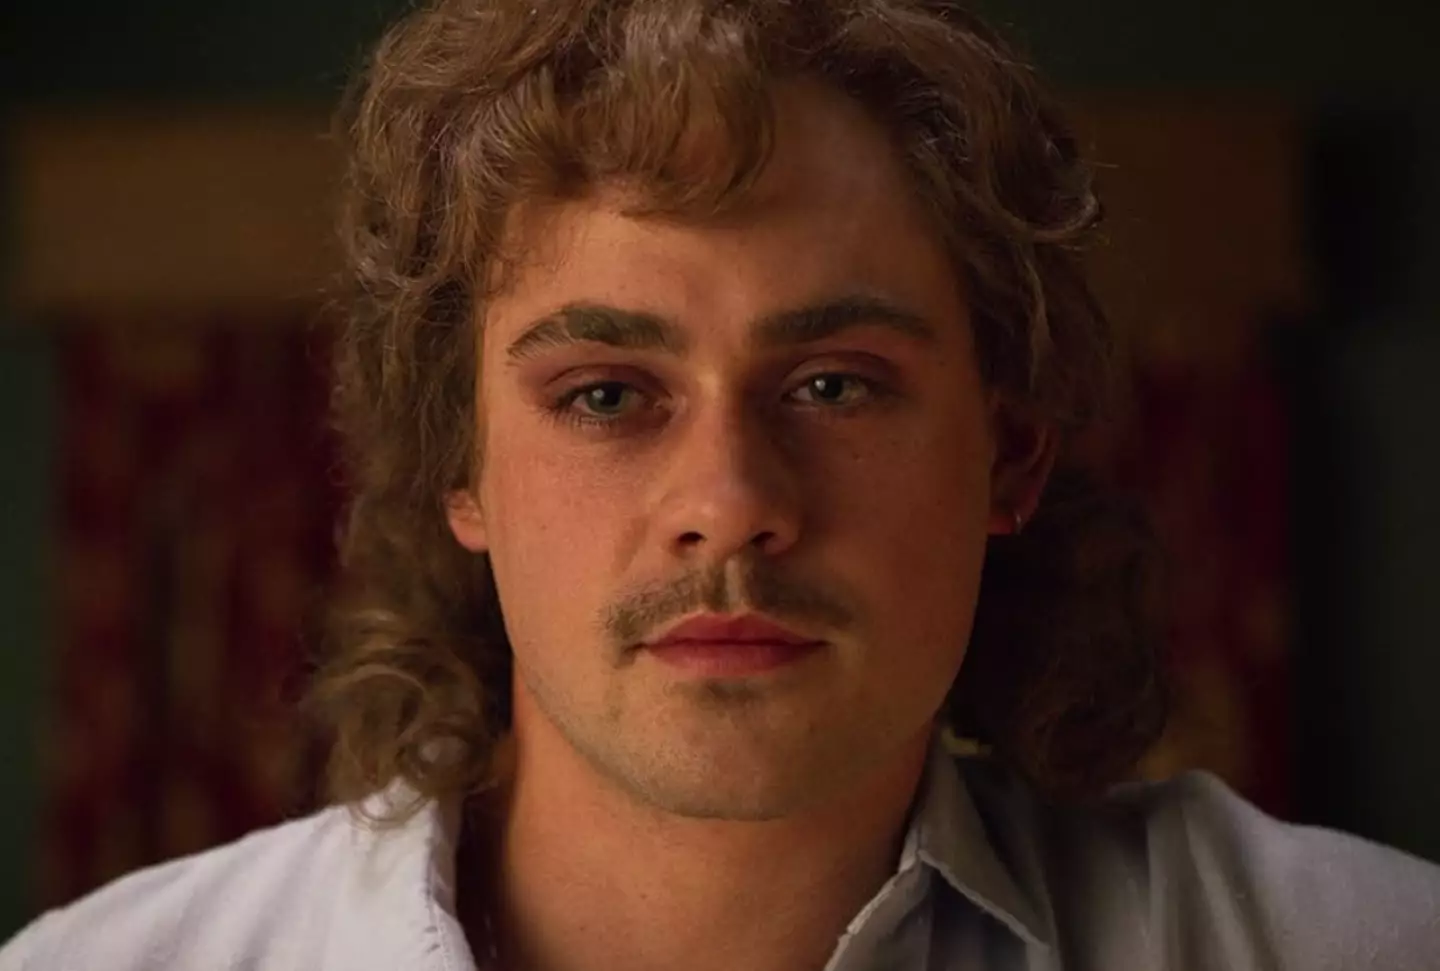 Dacre Montgomery plays the role of Billy Hargrove in Stranger Things.